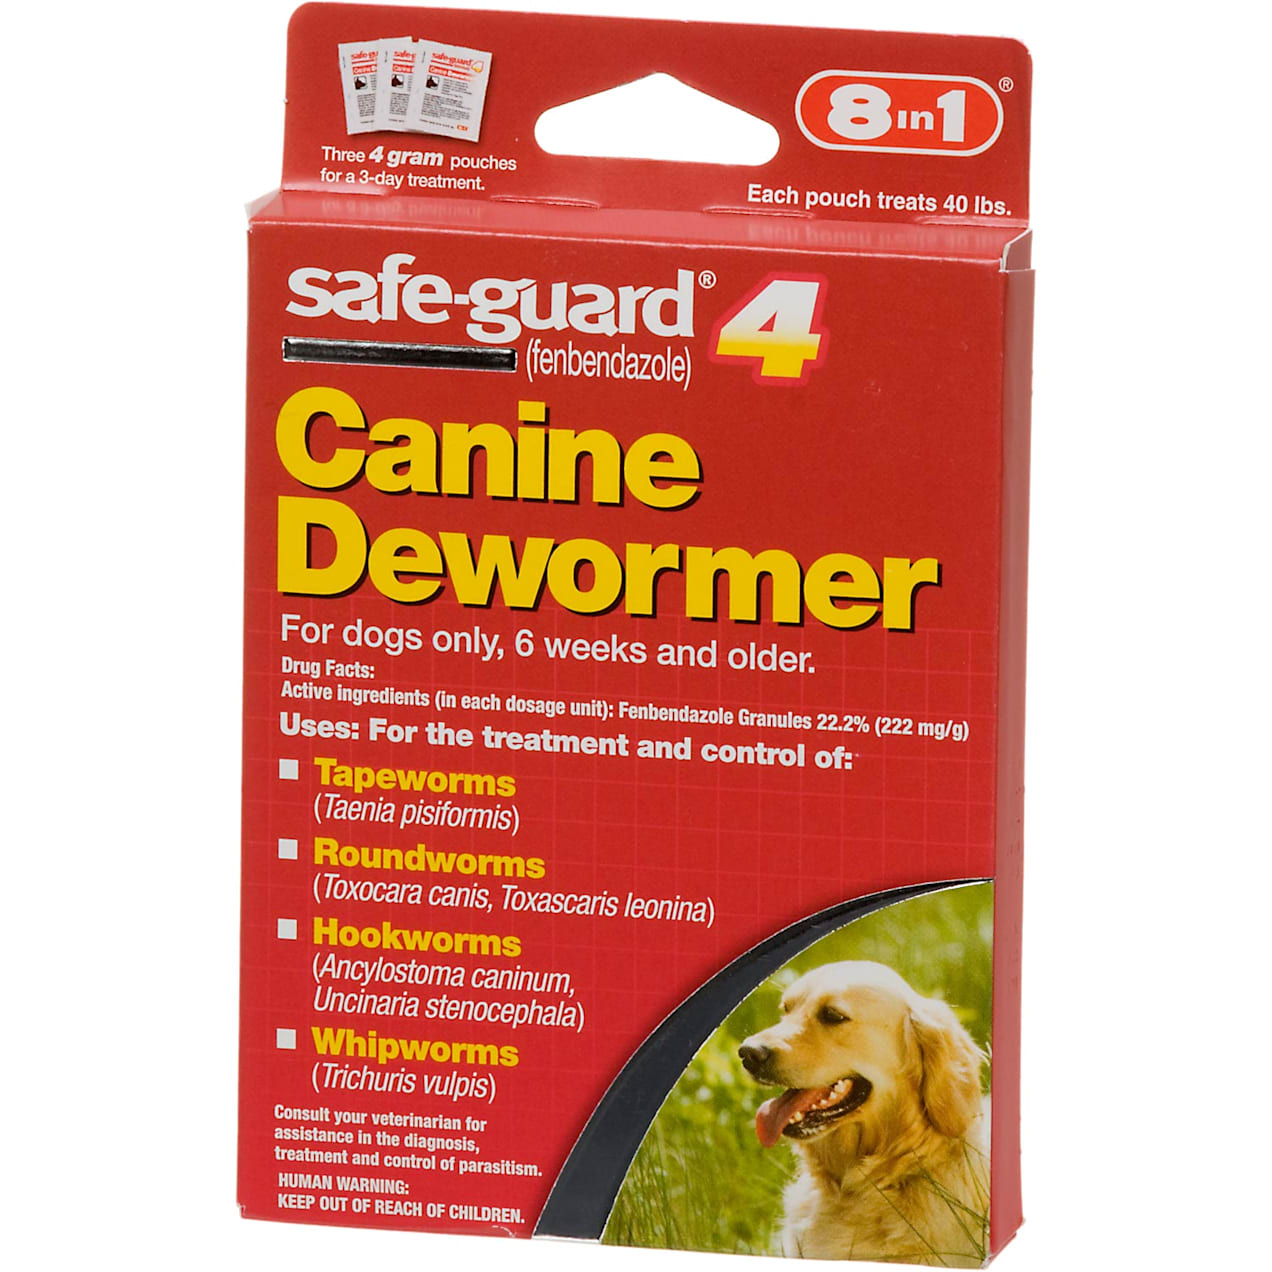 8 in 1 safe-guard 4 Canine Dewormer for Large Dogs | Petco